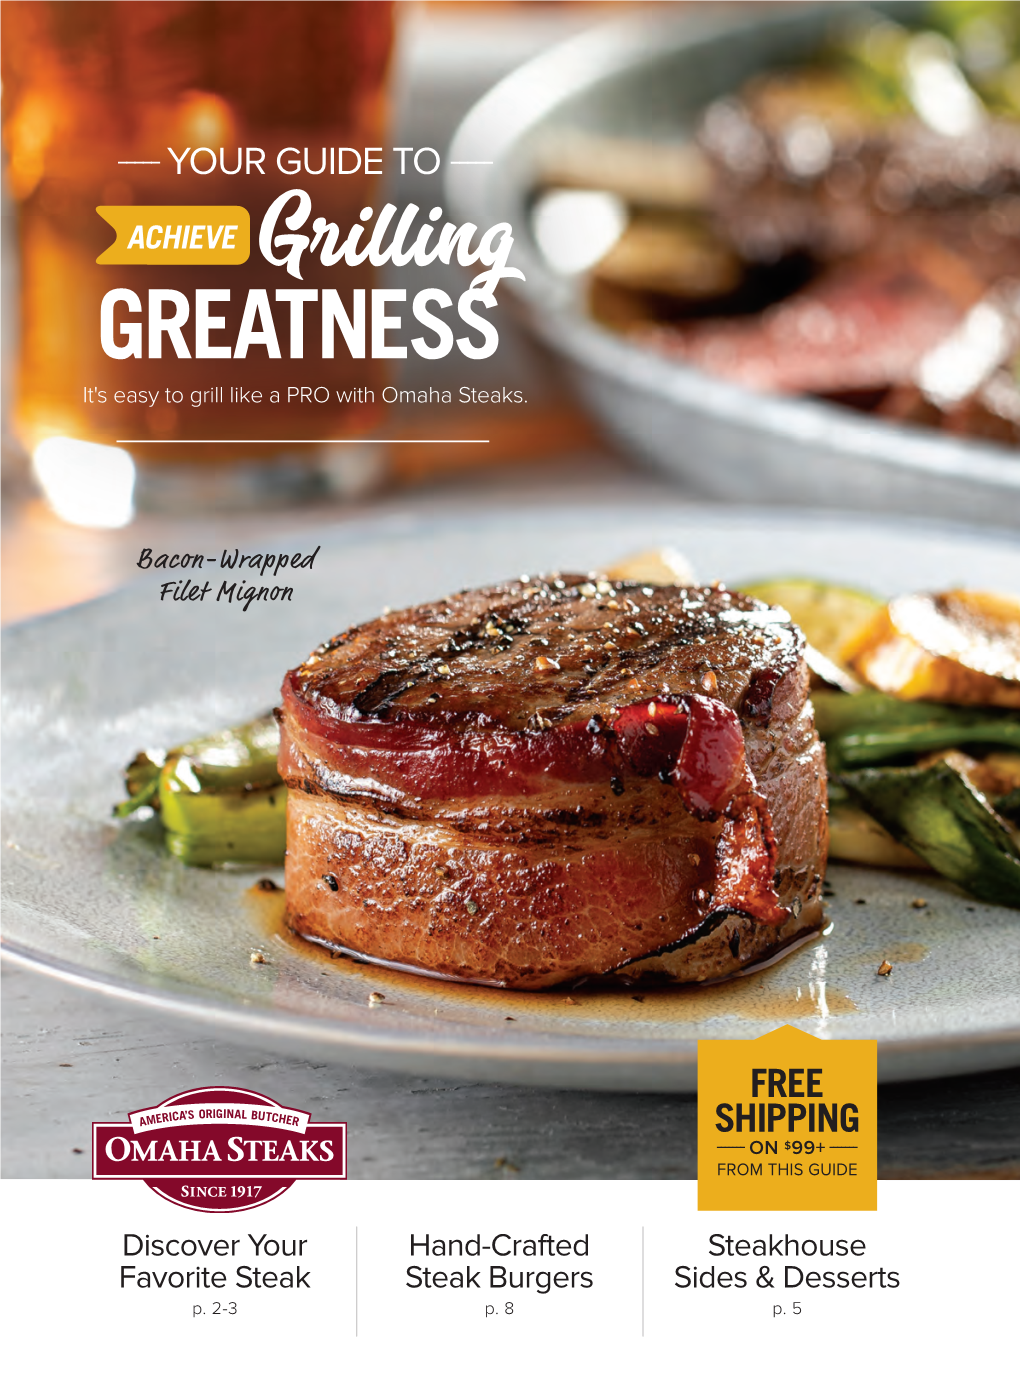 GREATNESS It's Easy to Grill Like a PRO with Omaha Steaks